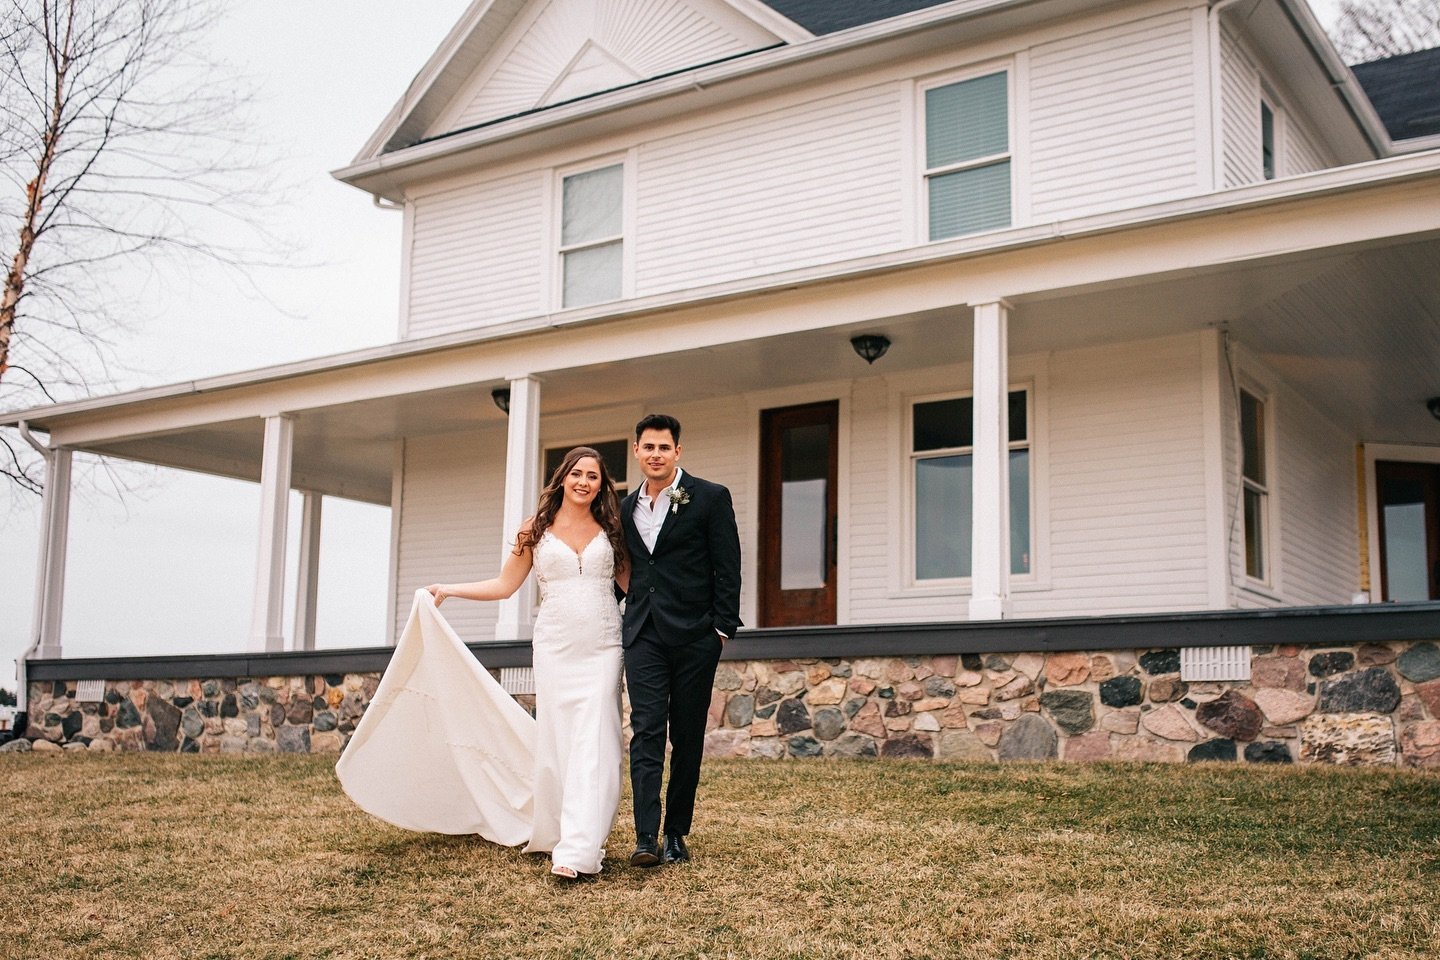 Notice anything different? 👀 

The photos in front of the farmhouse are simply breathtaking. I hope we see more this season! 

The Clemens Surprise Wedding Part II is up on @articlesbythemill !